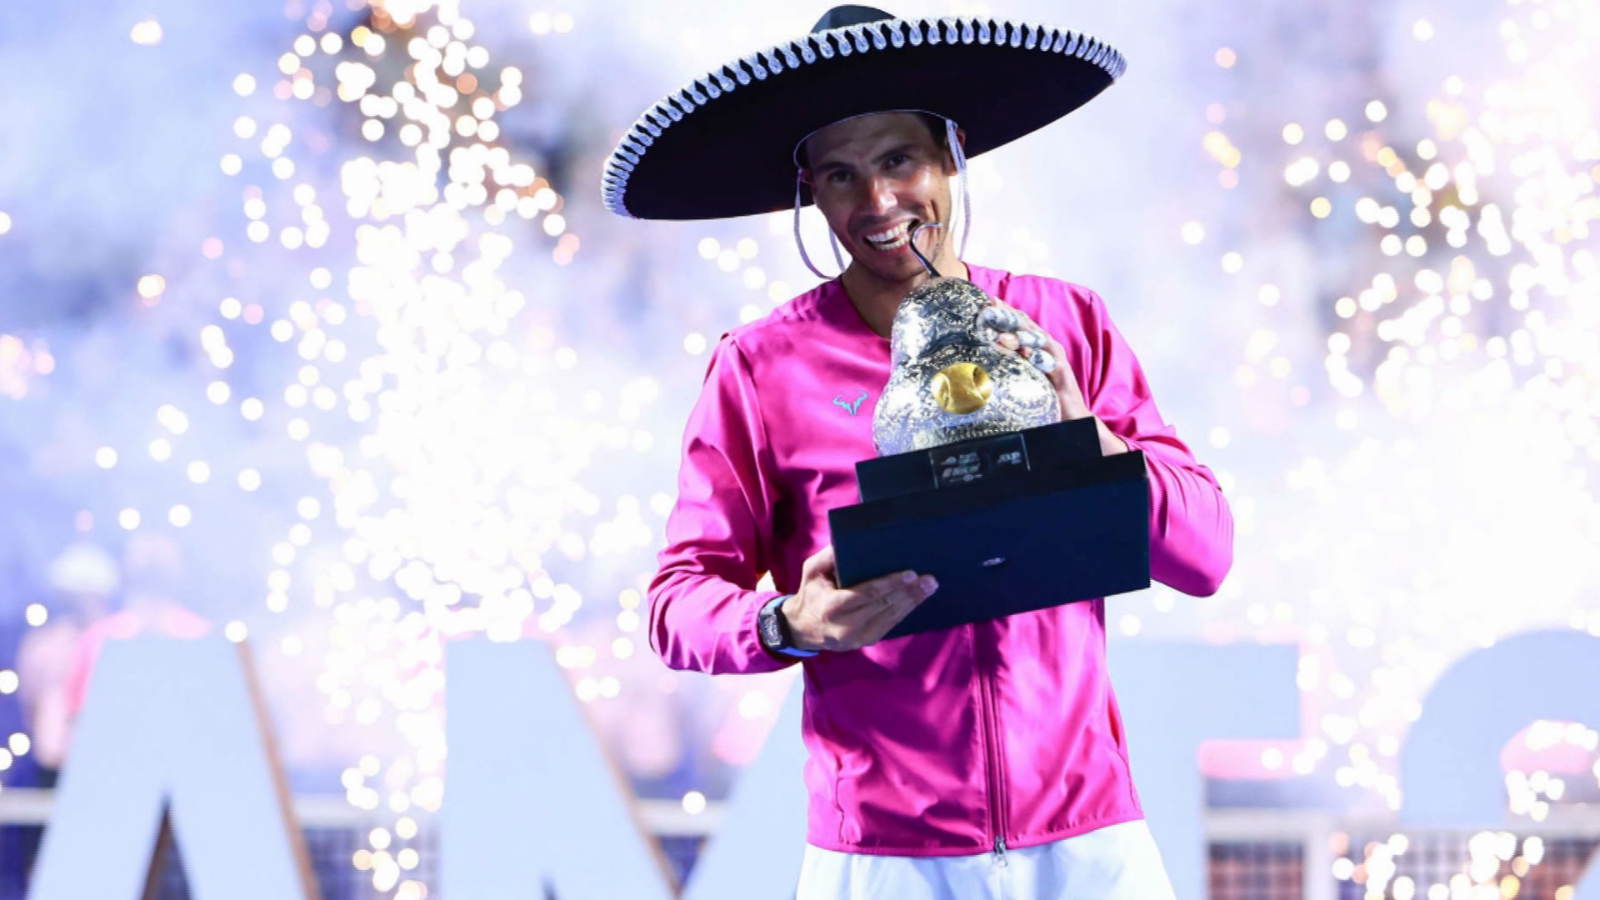 Rafa Nadal, champion of a Mexican Tennis Open that is growing more and